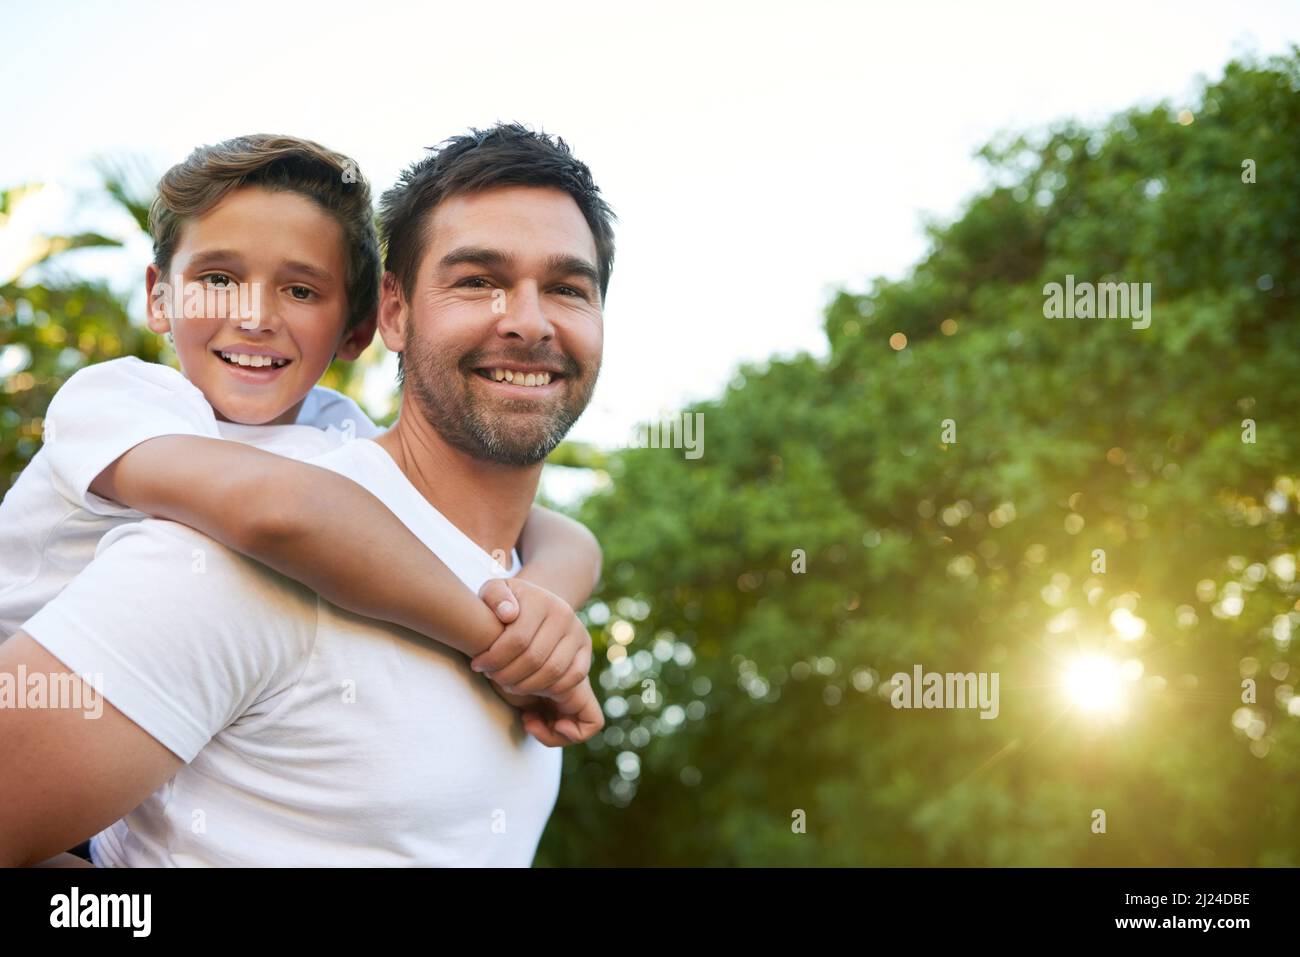 Enjoying the day with dad. Cropped shot of an affectionate young father and his son. Stock Photo